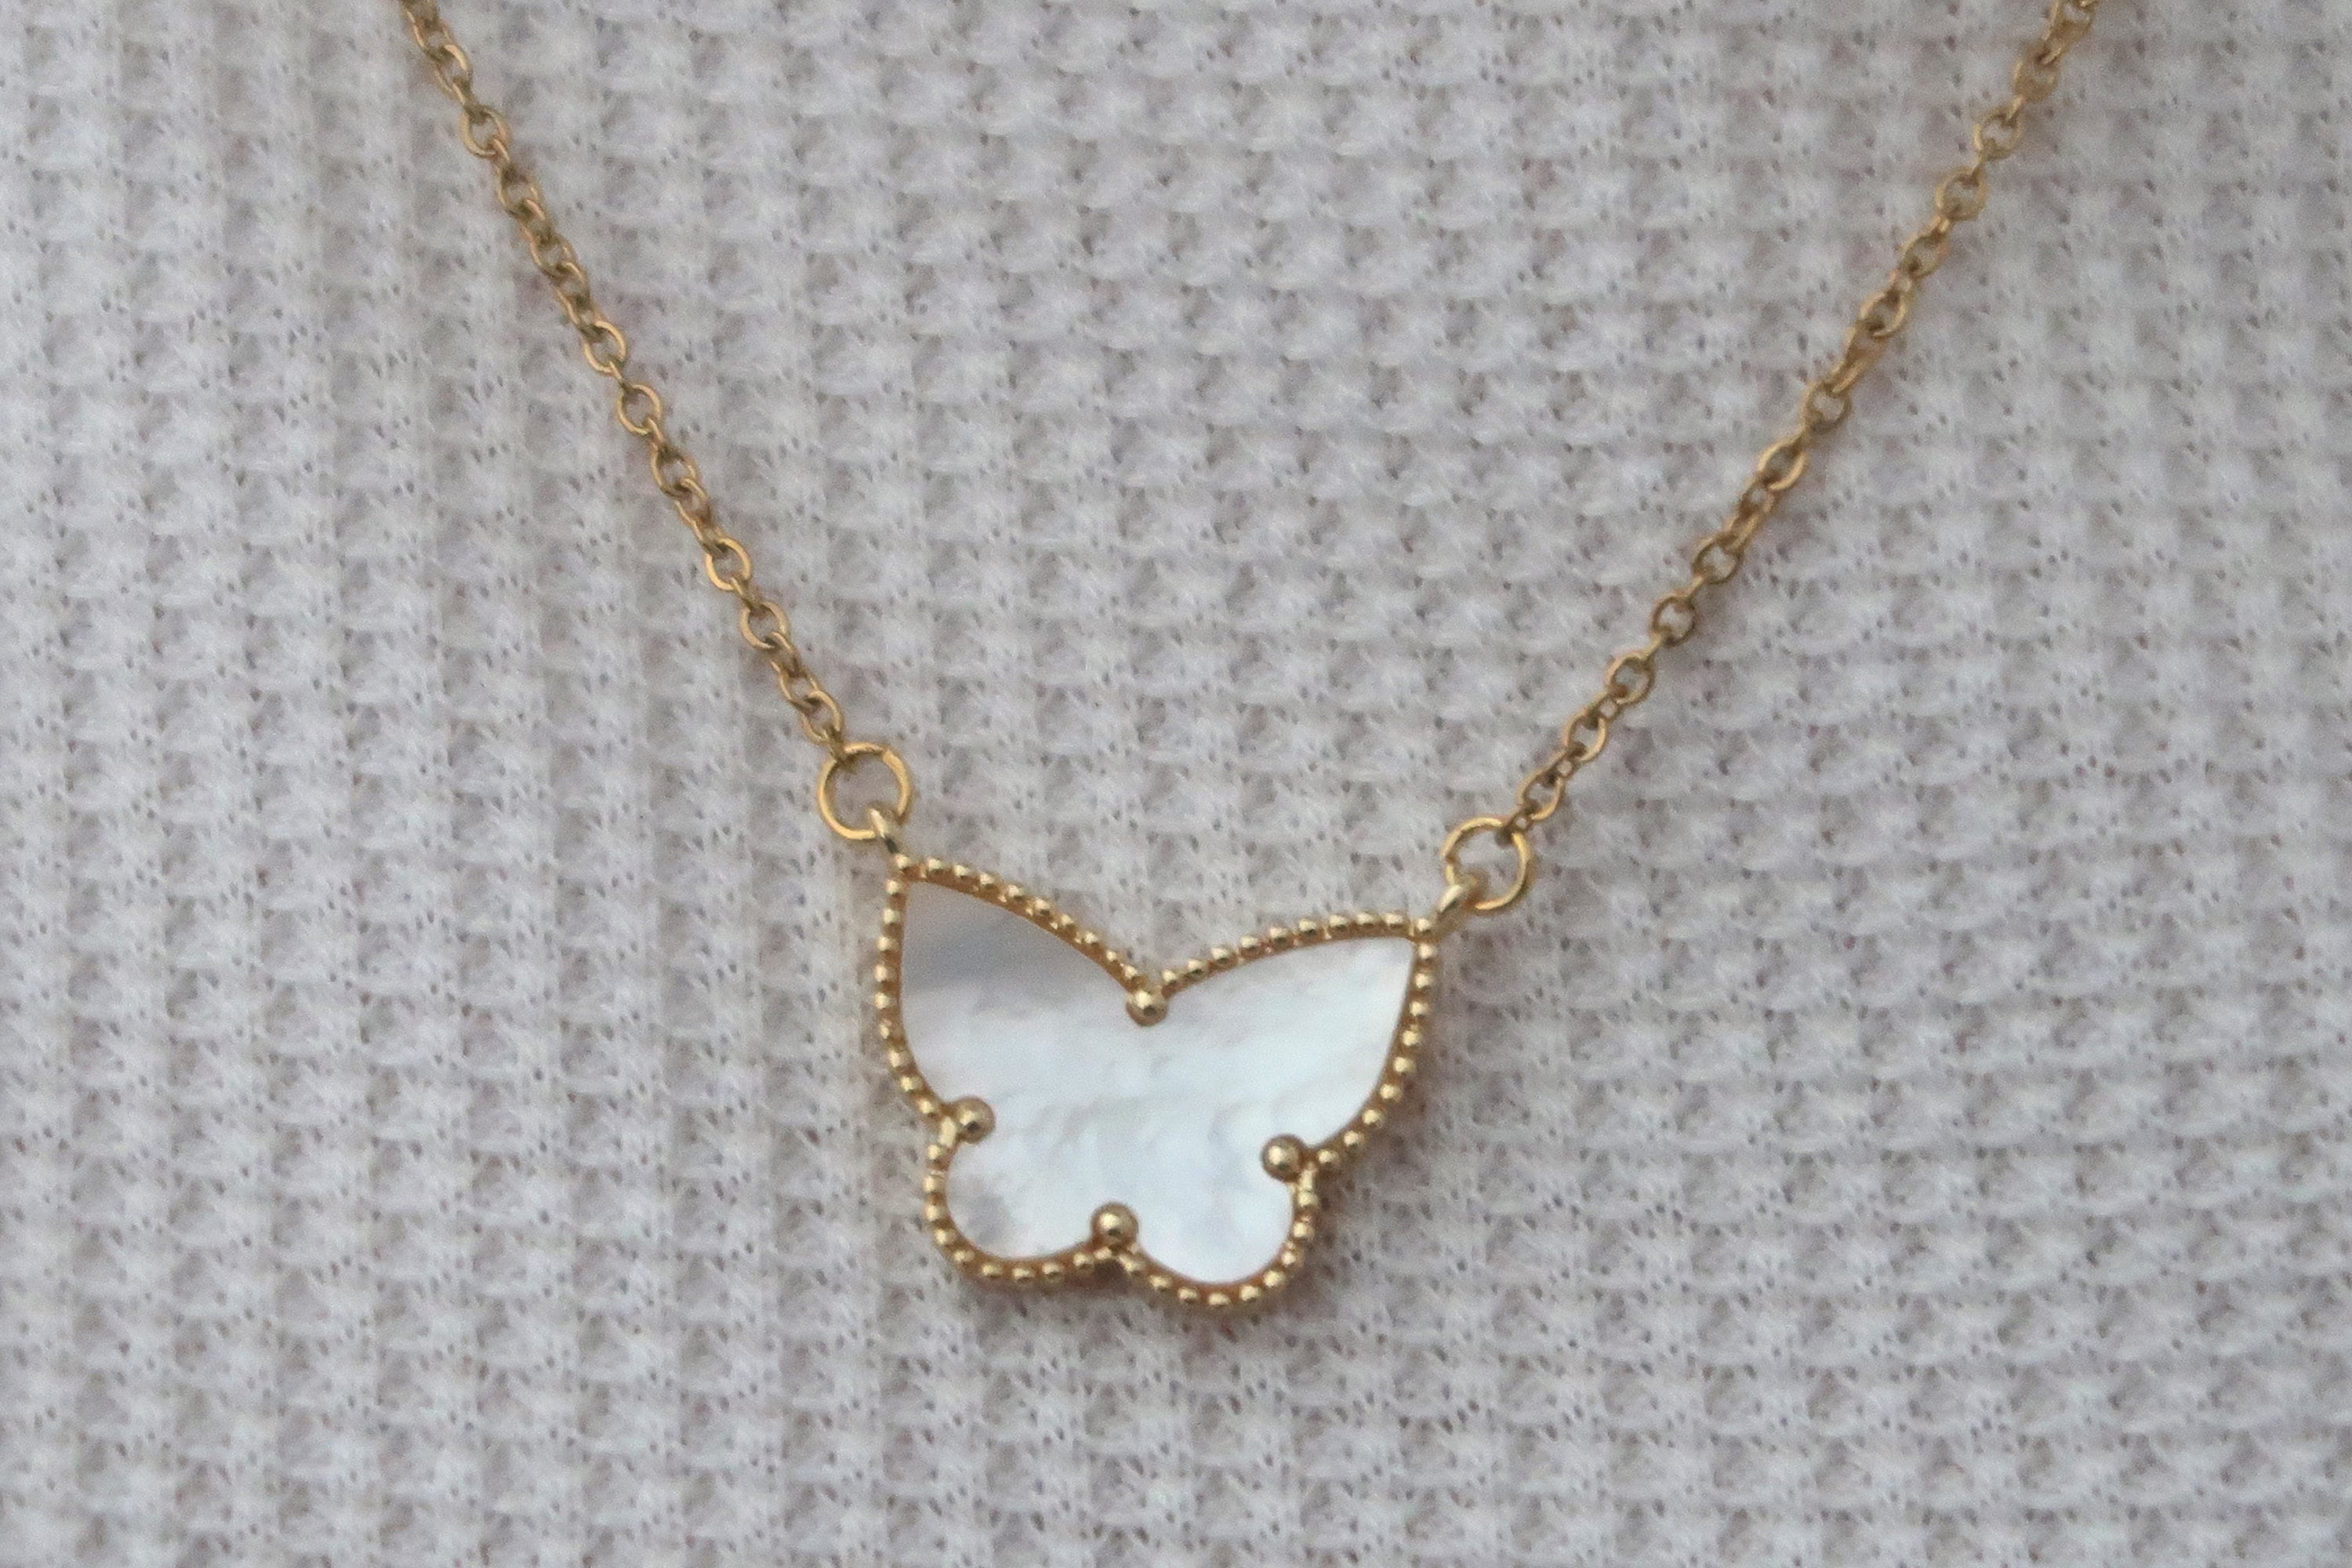 AUTHENTIC VCA BUTTERFLY 🦋 NECKLACE - WITH JAPAN STORE CERT & RECEIPT -  SHIP AIRMAIL FROM JAPAN, Luxury, Accessories on Carousell